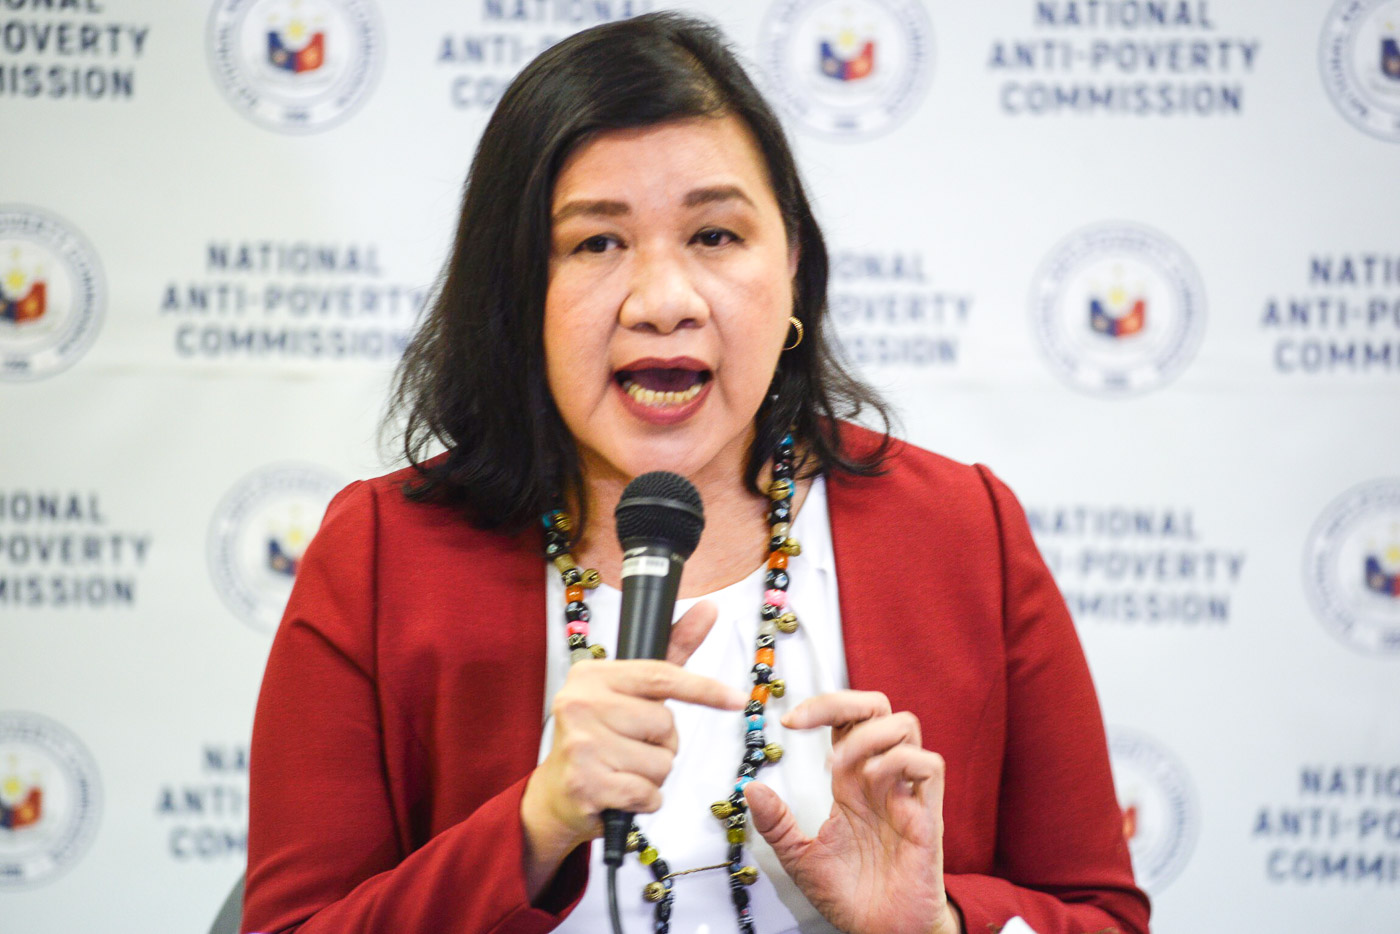 QUITTING. National Anti-Poverty Commission Secretary Liza Maza says in a press conference that she has tendered her 'irrevocable' resignation. Photo by Maria Tan/Rappler 